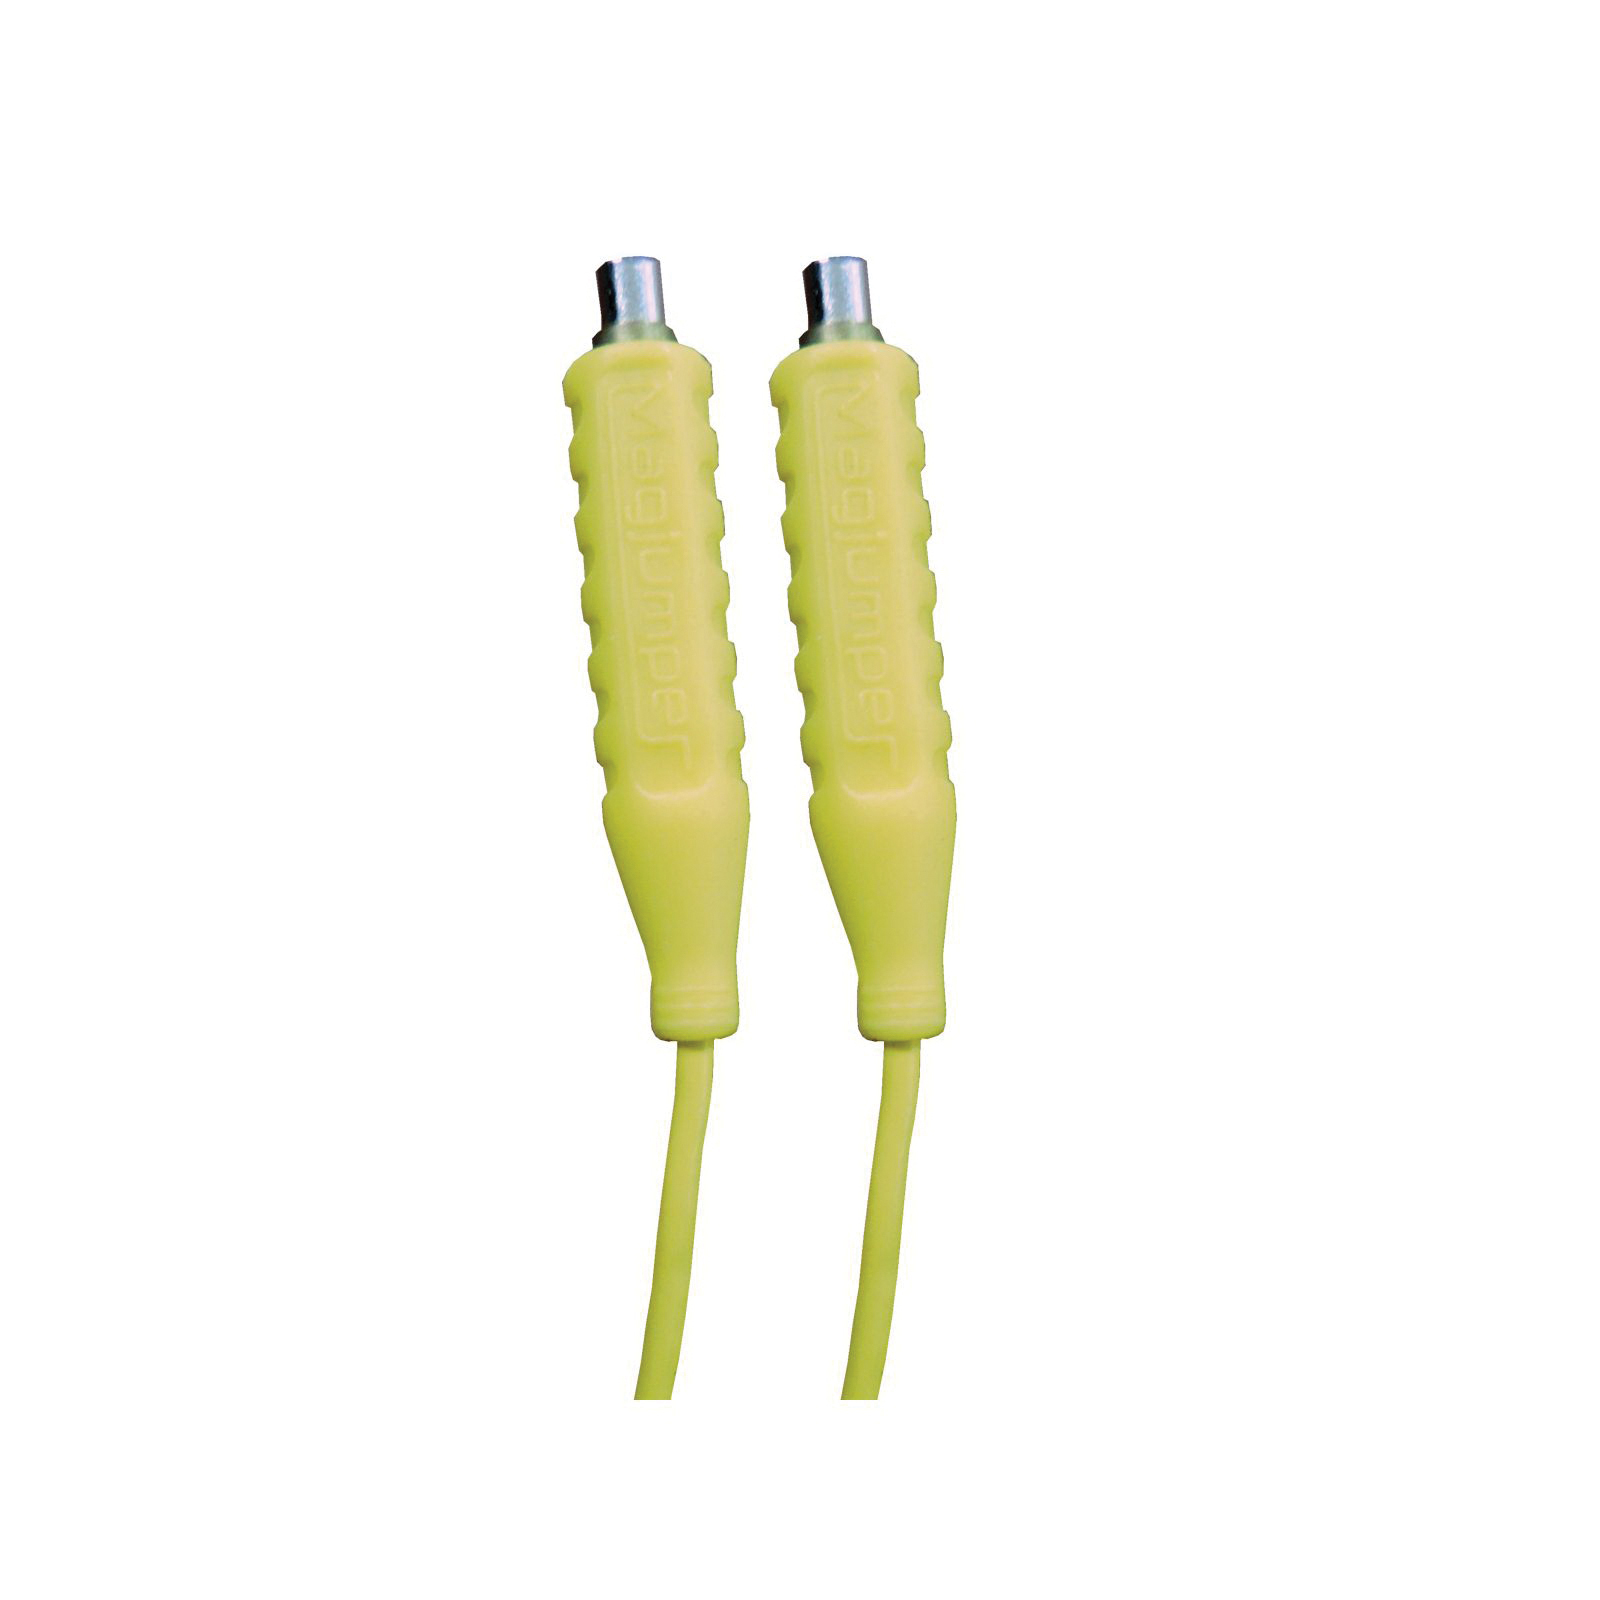 Supco MAG1YL Jumper Wire 